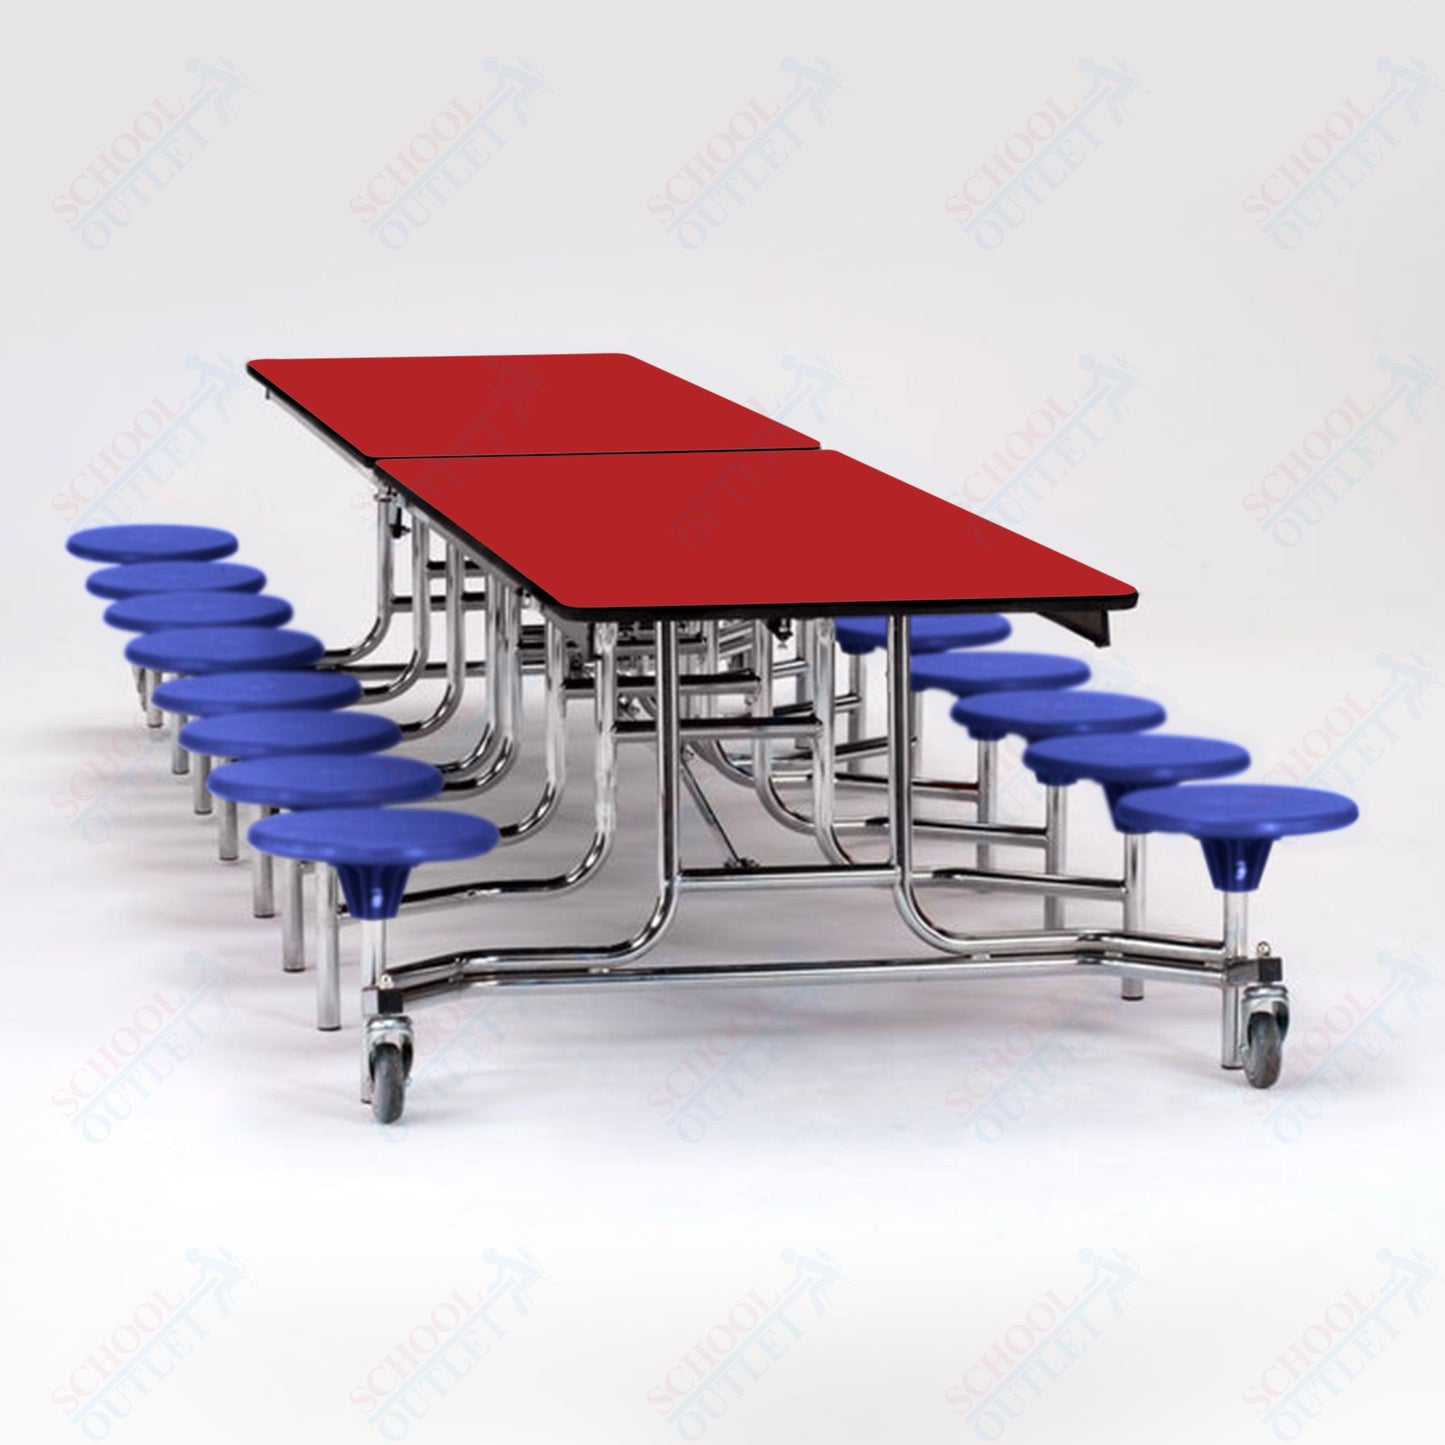 NPS Mobile Cafeteria Table - 30" W x 12' L - 16 Stools - Plywood Core - Protect Edge - Black Powdercoated Frame